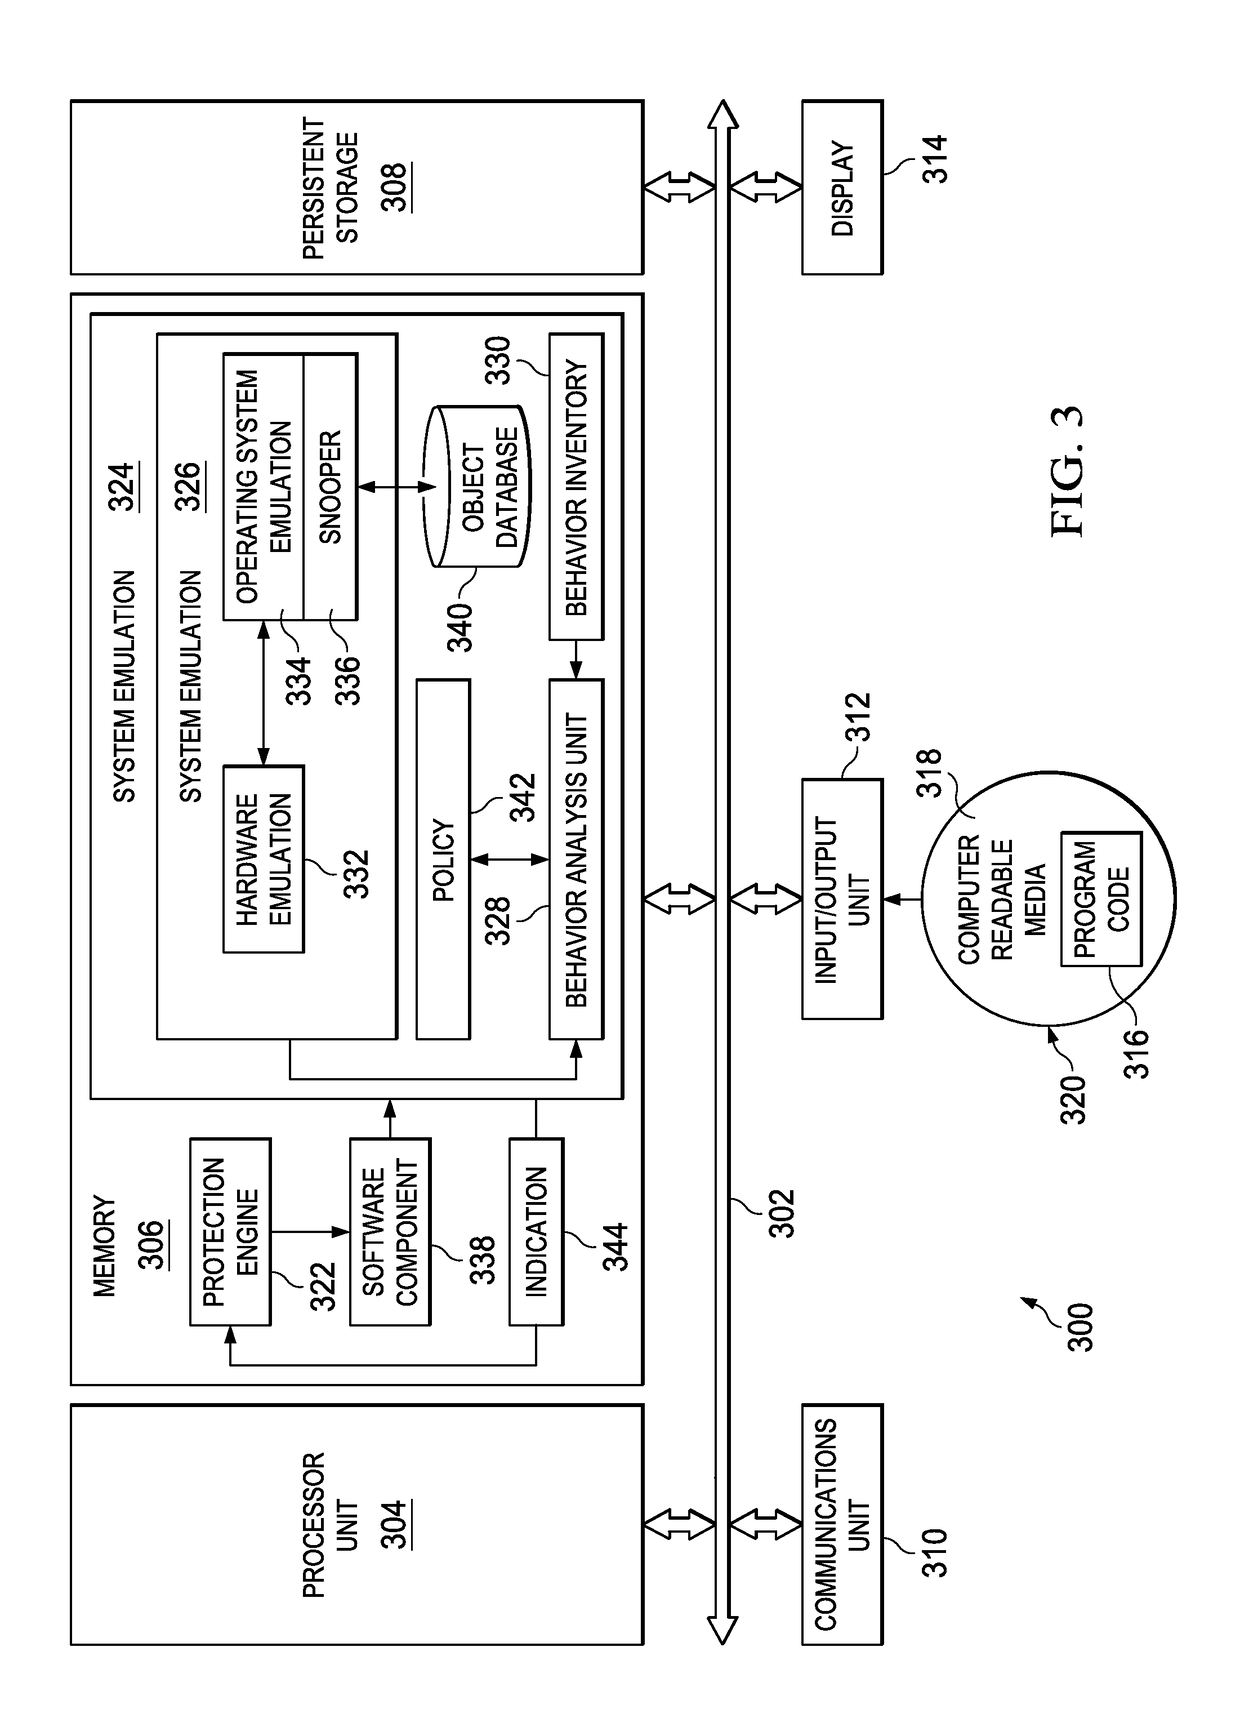 Autonomic exclusion in a tiered delivery network